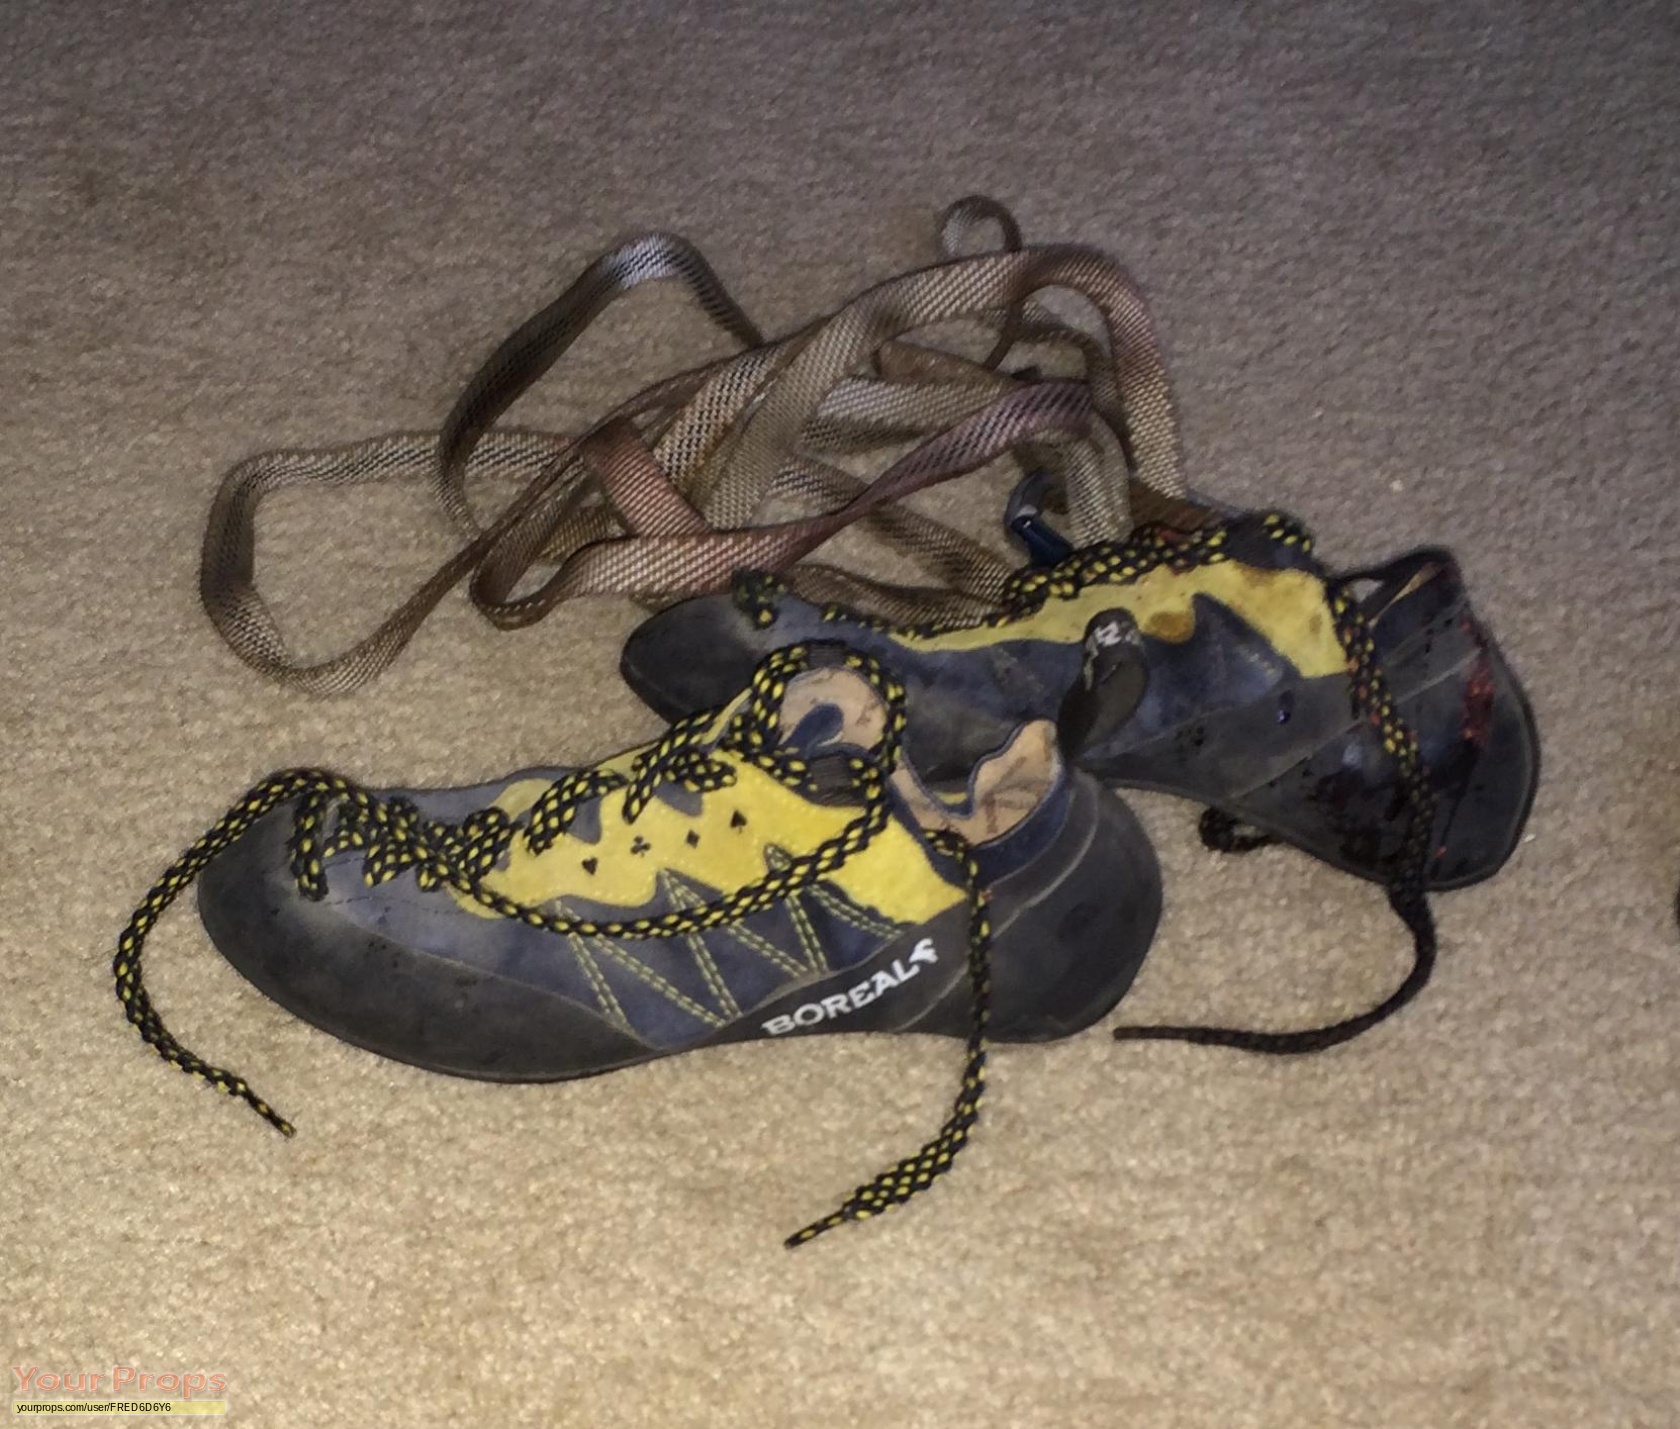 Screen-Used bloody rock climbing shoes 